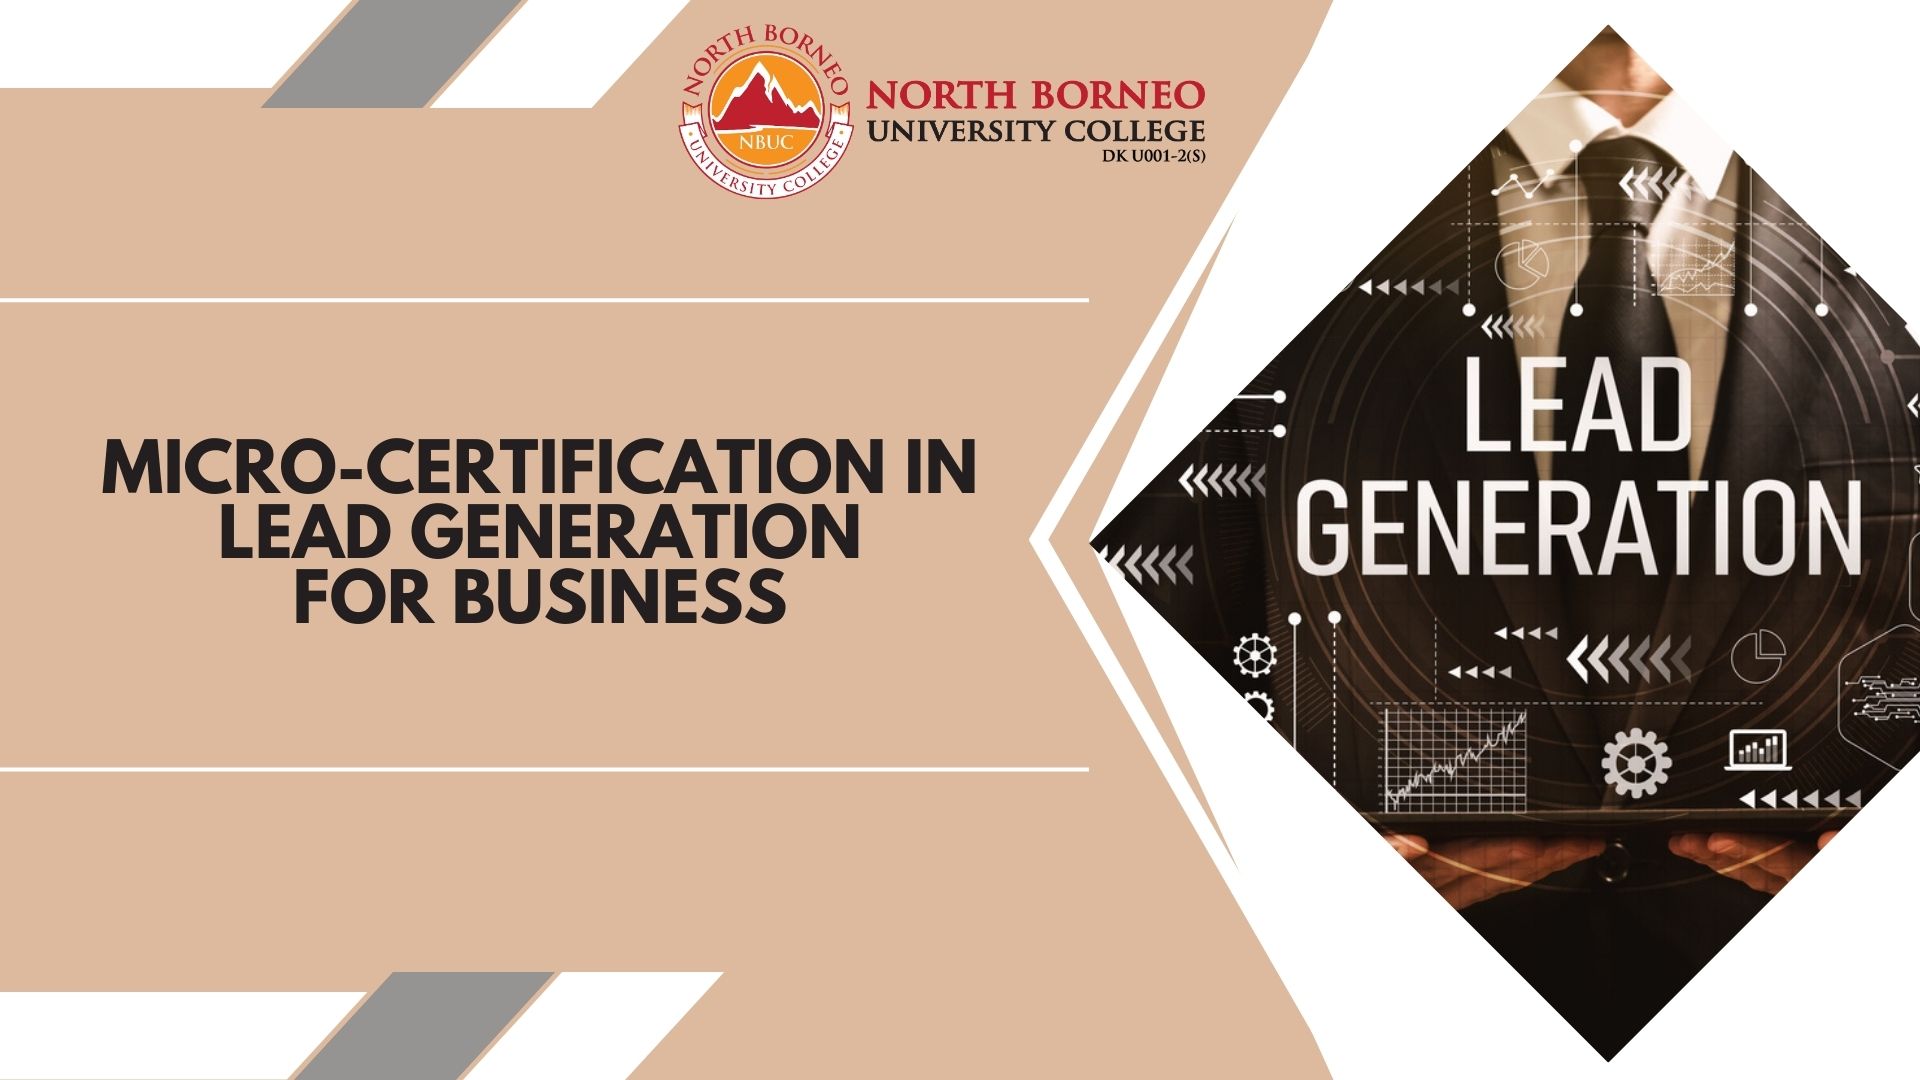 MICRO-CERTIFICATION IN LEAD GENERATION FOR BUSINESS